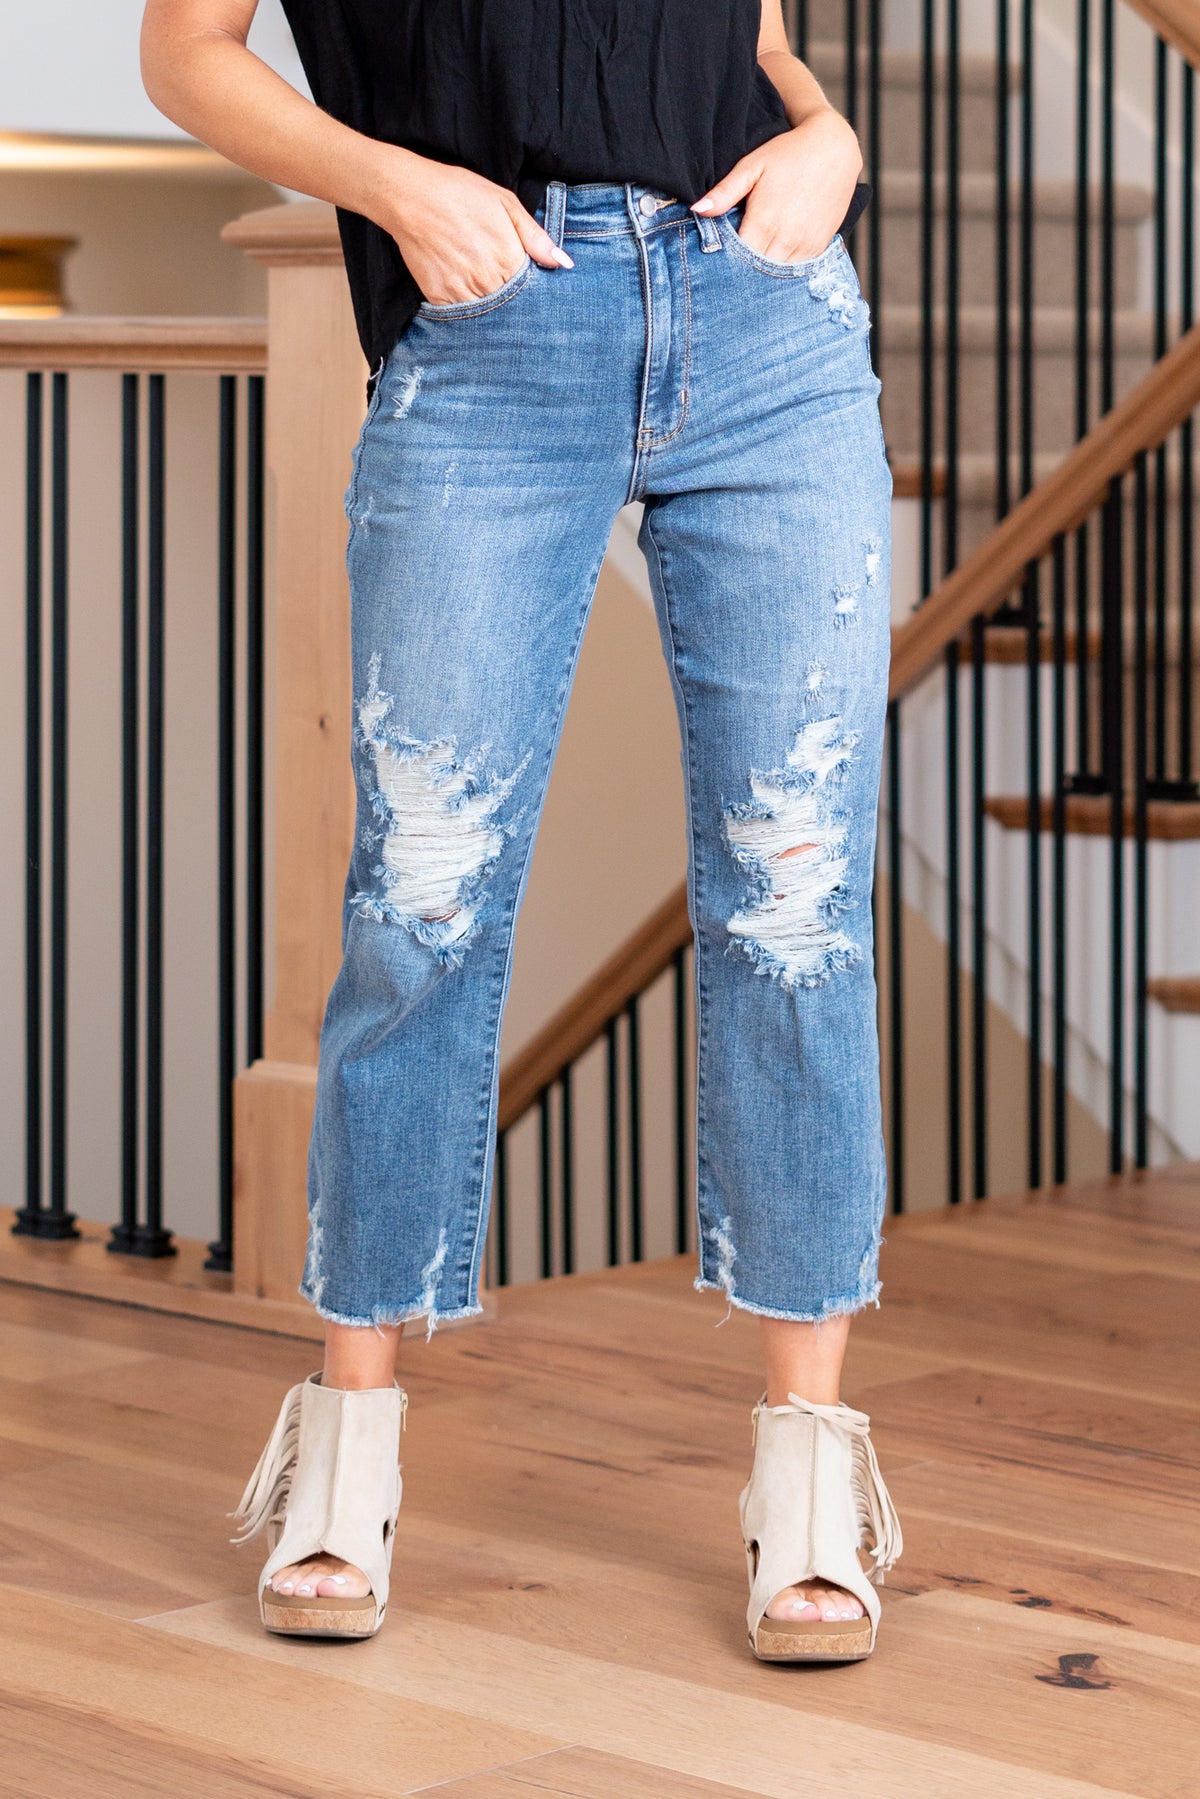 Judy Blue  Update your wardrobe with these high rise cropped straight fit jeans. Color: Medium Blue  Cut: Straight fit, 25"* High Rise, 11" Front Rise* Material: 93% Cotton / 6% Polyester / 1% Spandex Stitching: Classic Fly: Zipper Fly Style #: JB82434 | 82434 Contact us for any additional measurements or sizing.   *Measured on the smallest size, measurements may vary by size.  Sarah wears a size 25 in jeans, a small in tops, and 8 in shoes. She is wearing size 25 in these jeans. 